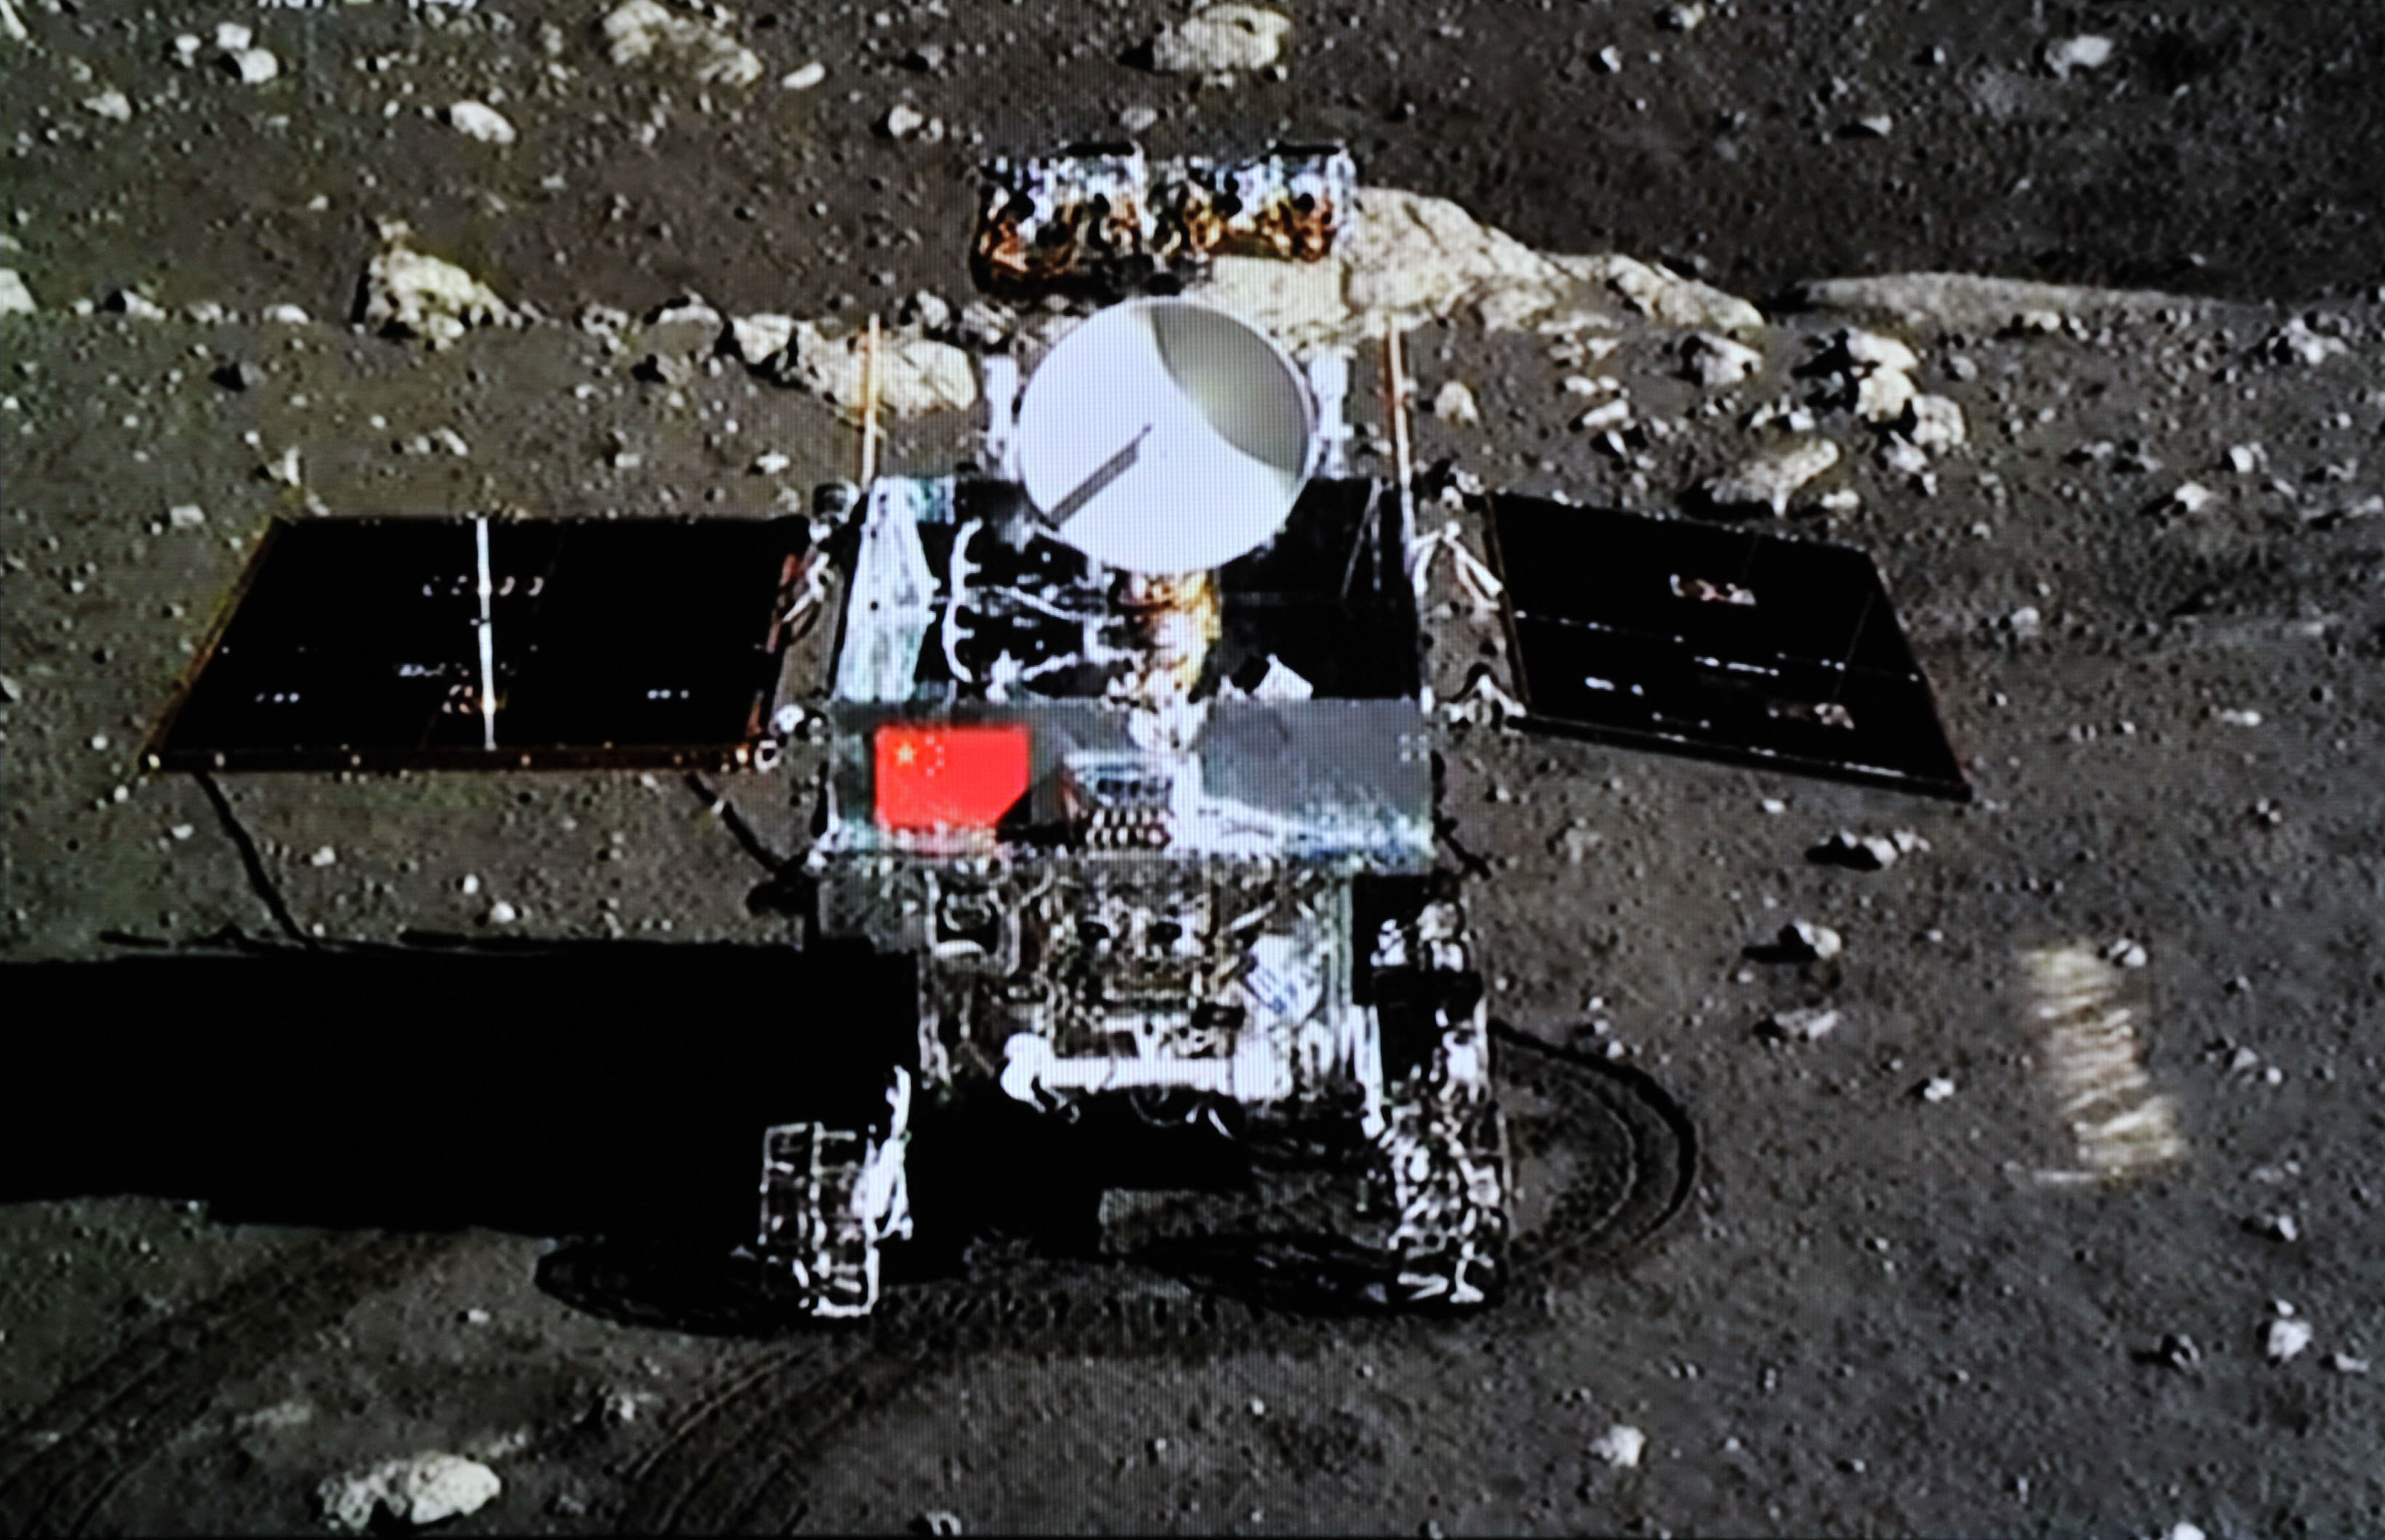 Chinas first moon rover The Jade Rabbit on the surface of the moon during the ChangE-3 lunar exploration mission on Dec. 15, 2013. (Imaginechina/AP Images)